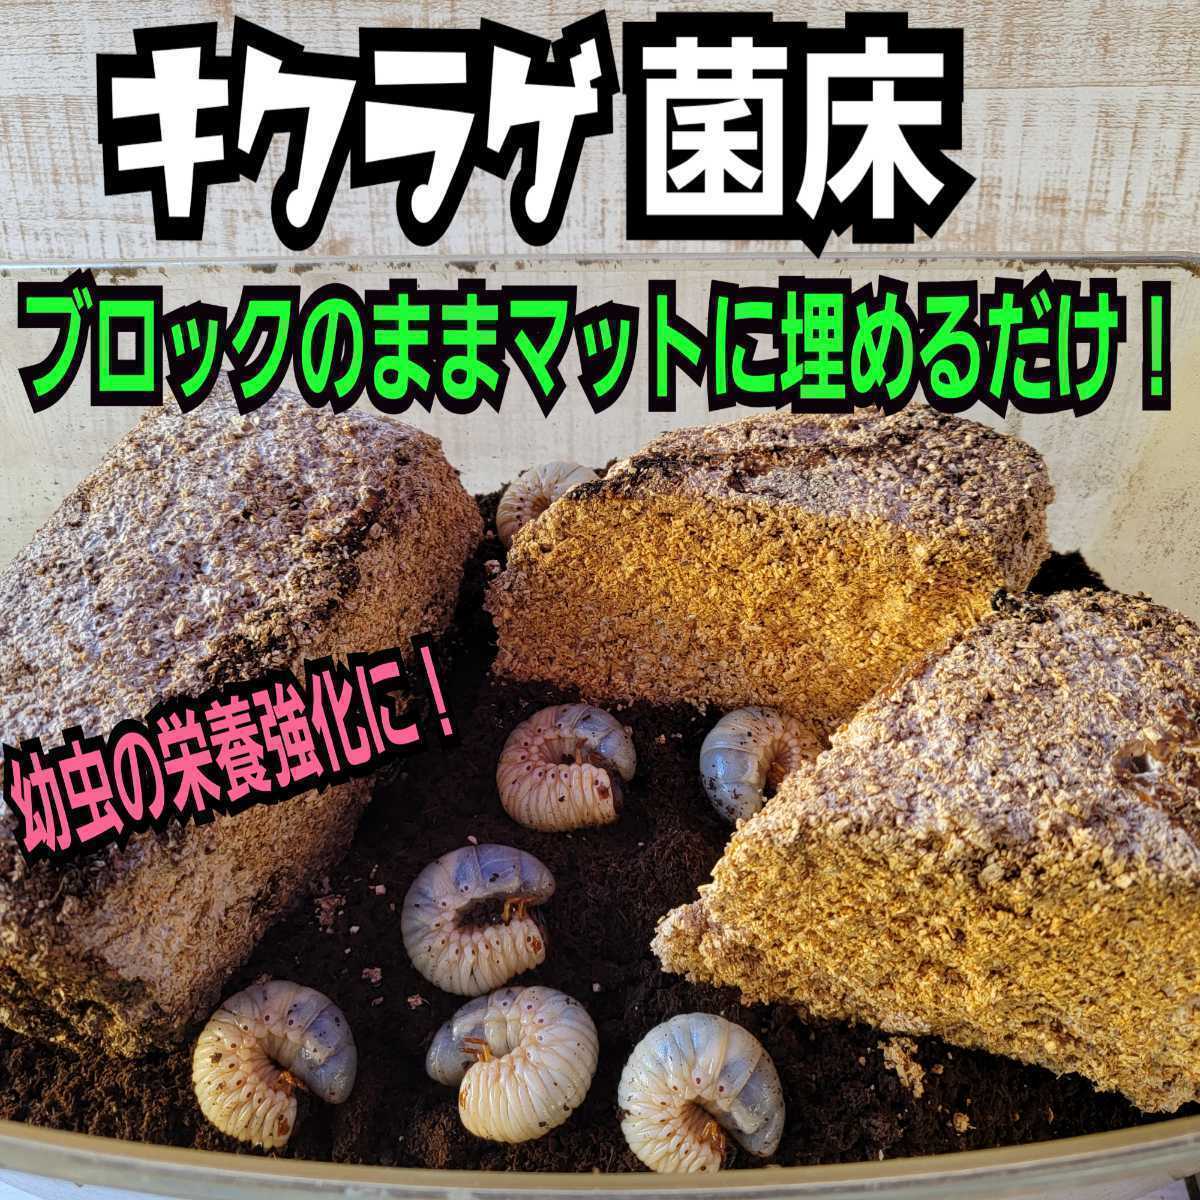  rhinoceros beetle larva. nutrition strengthen . eminent!ki jellyfish . floor extra-large block [15 piece set ] mat . embed only .mo Limo li meal ..! stag beetle. production egg floor also 